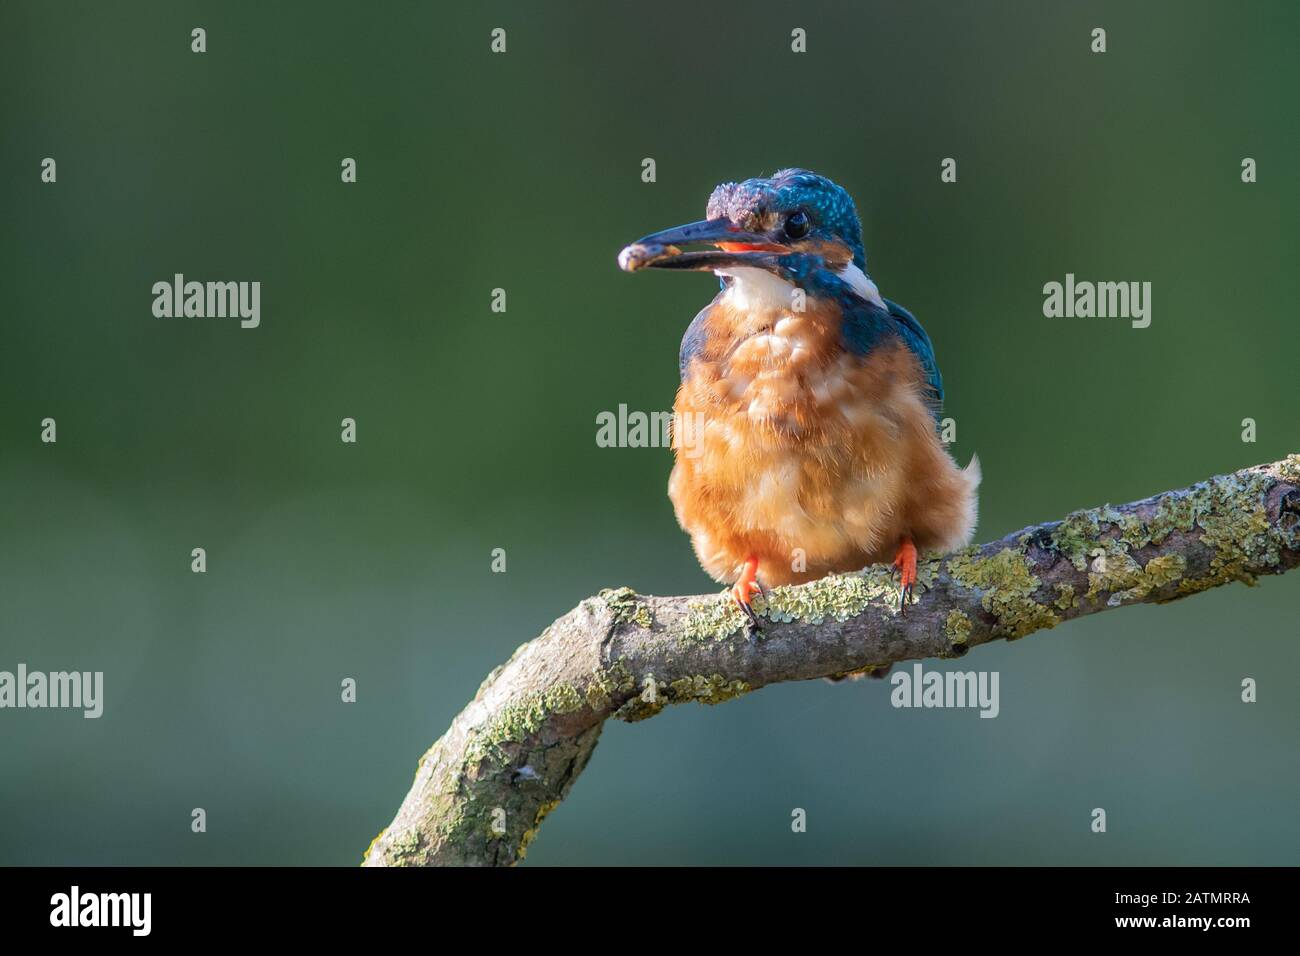 A male kingfisher, Alcedo atthis, is perched on a branch with a fish in its beak Stock Photo